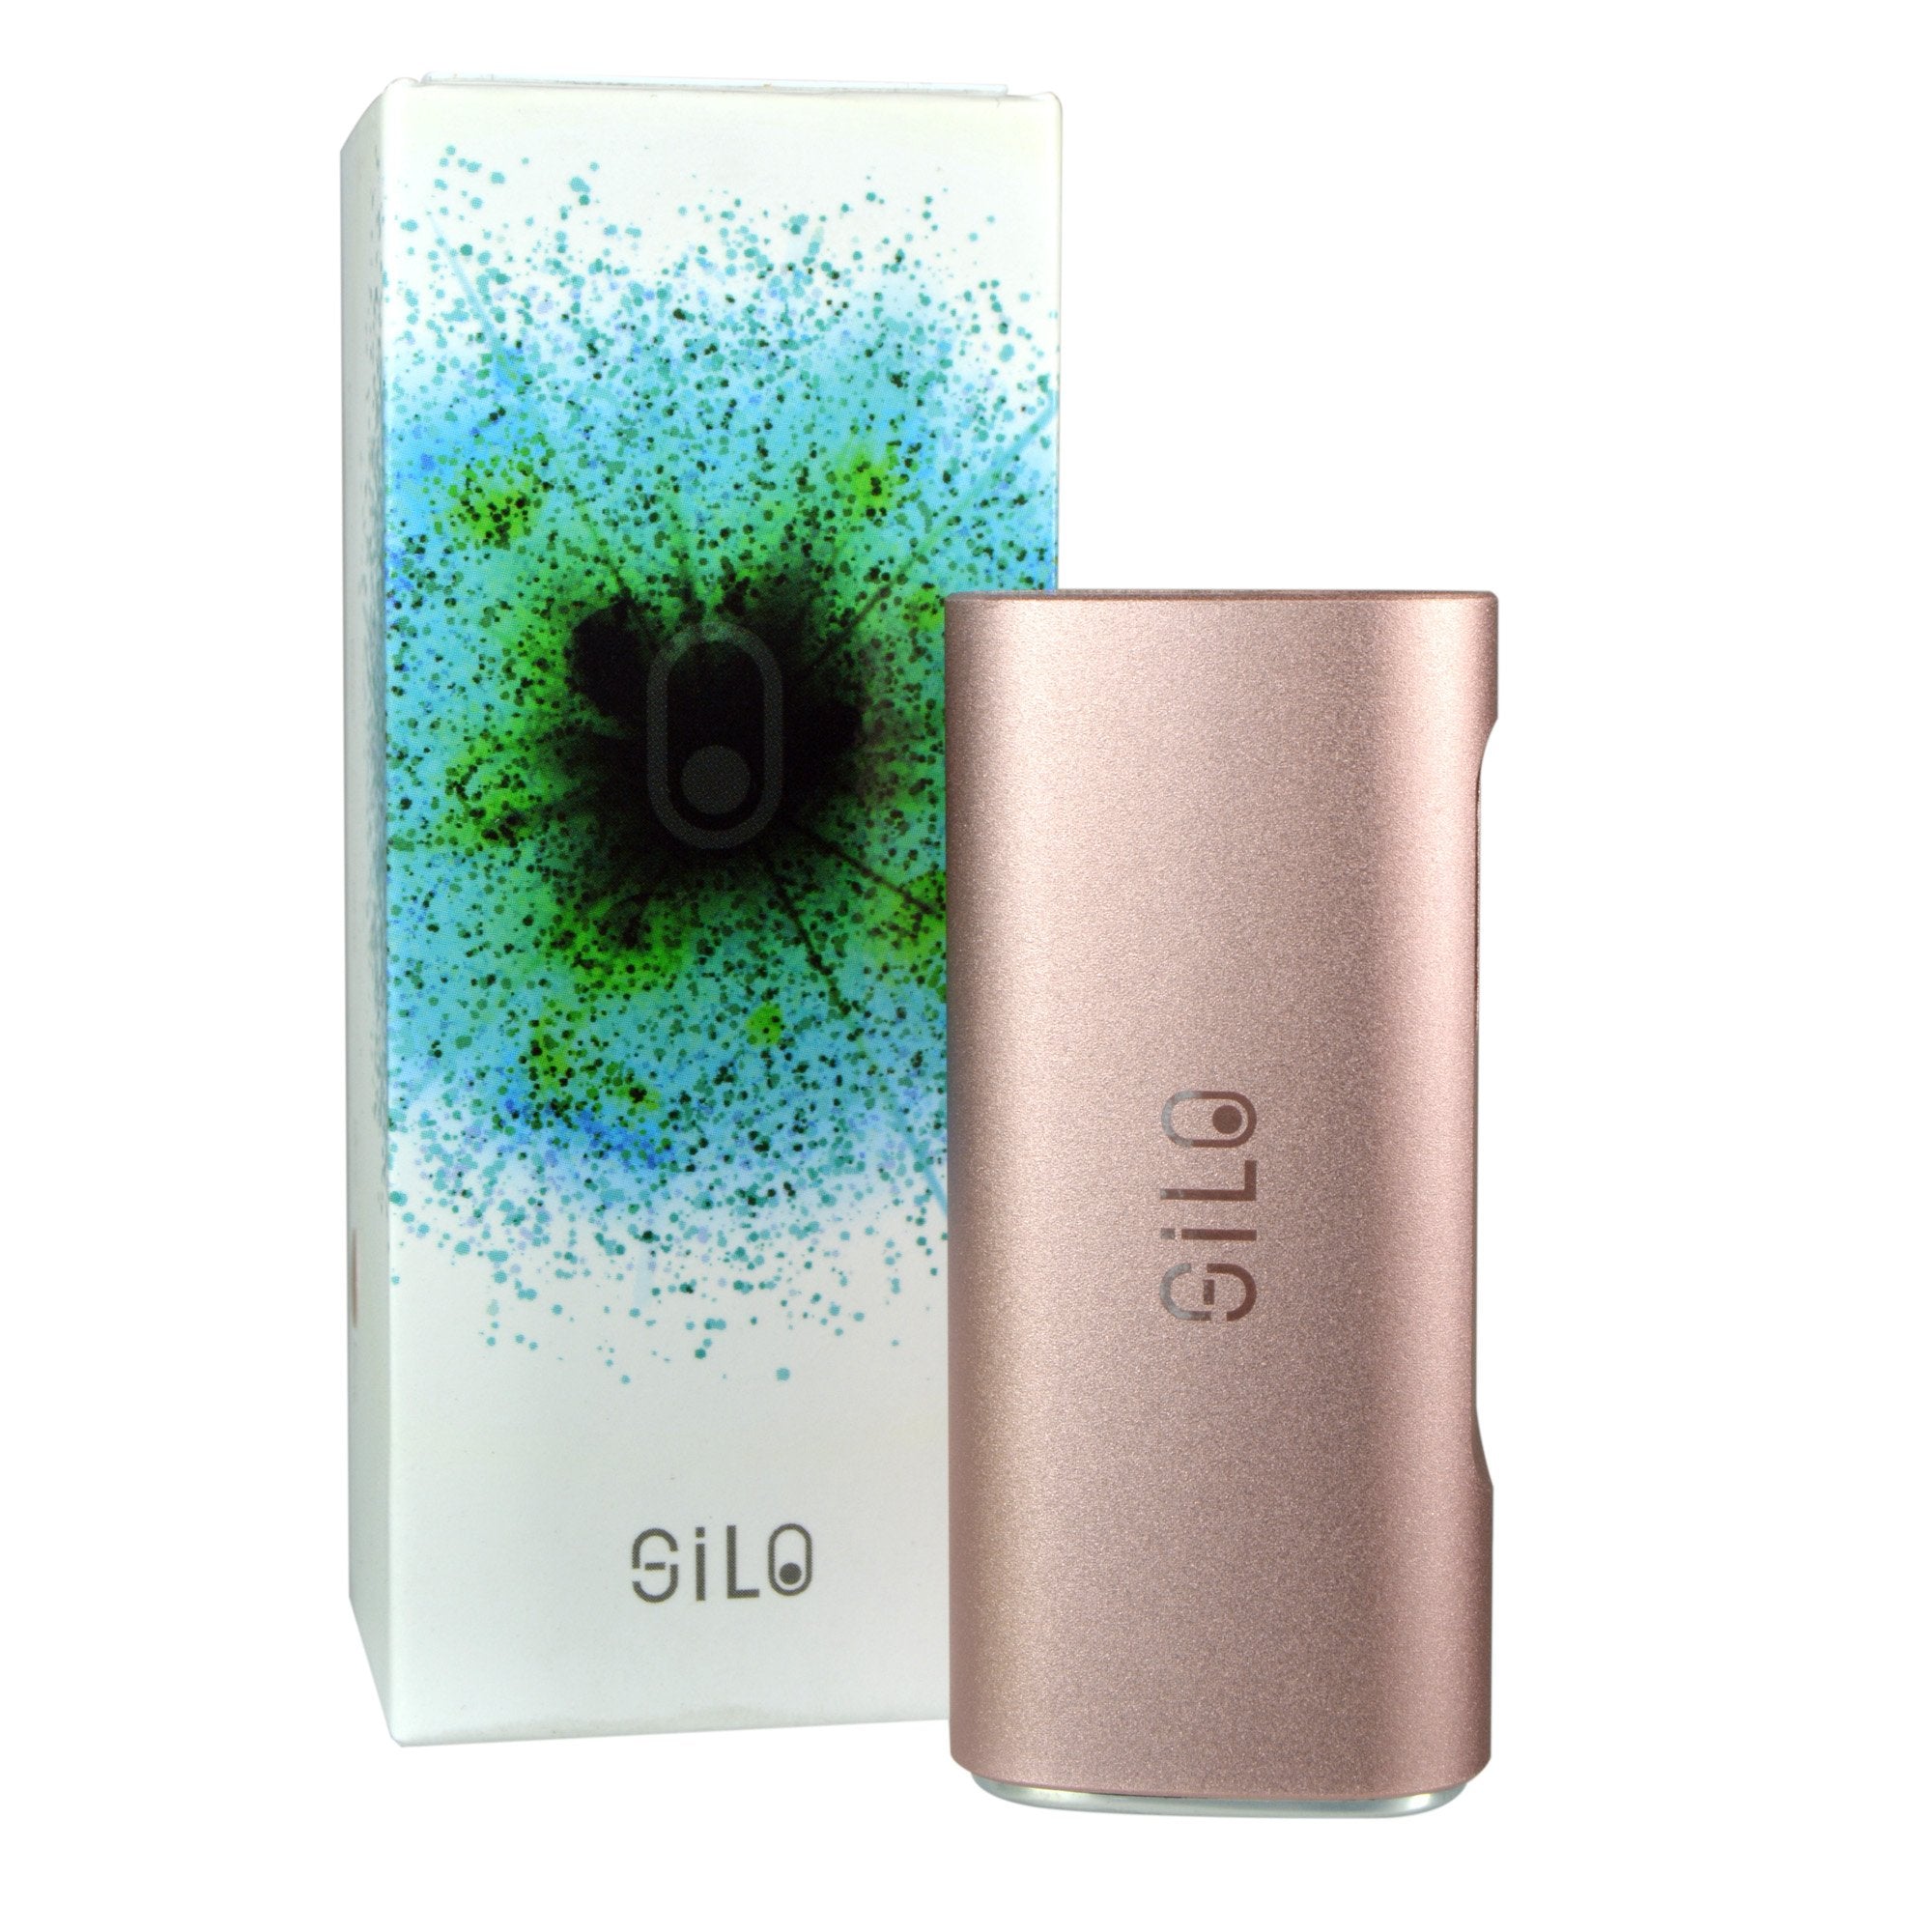 CCELL | Silo Vape Battery with USB Charger | 500mAh - Rose - 510 Thread - 1